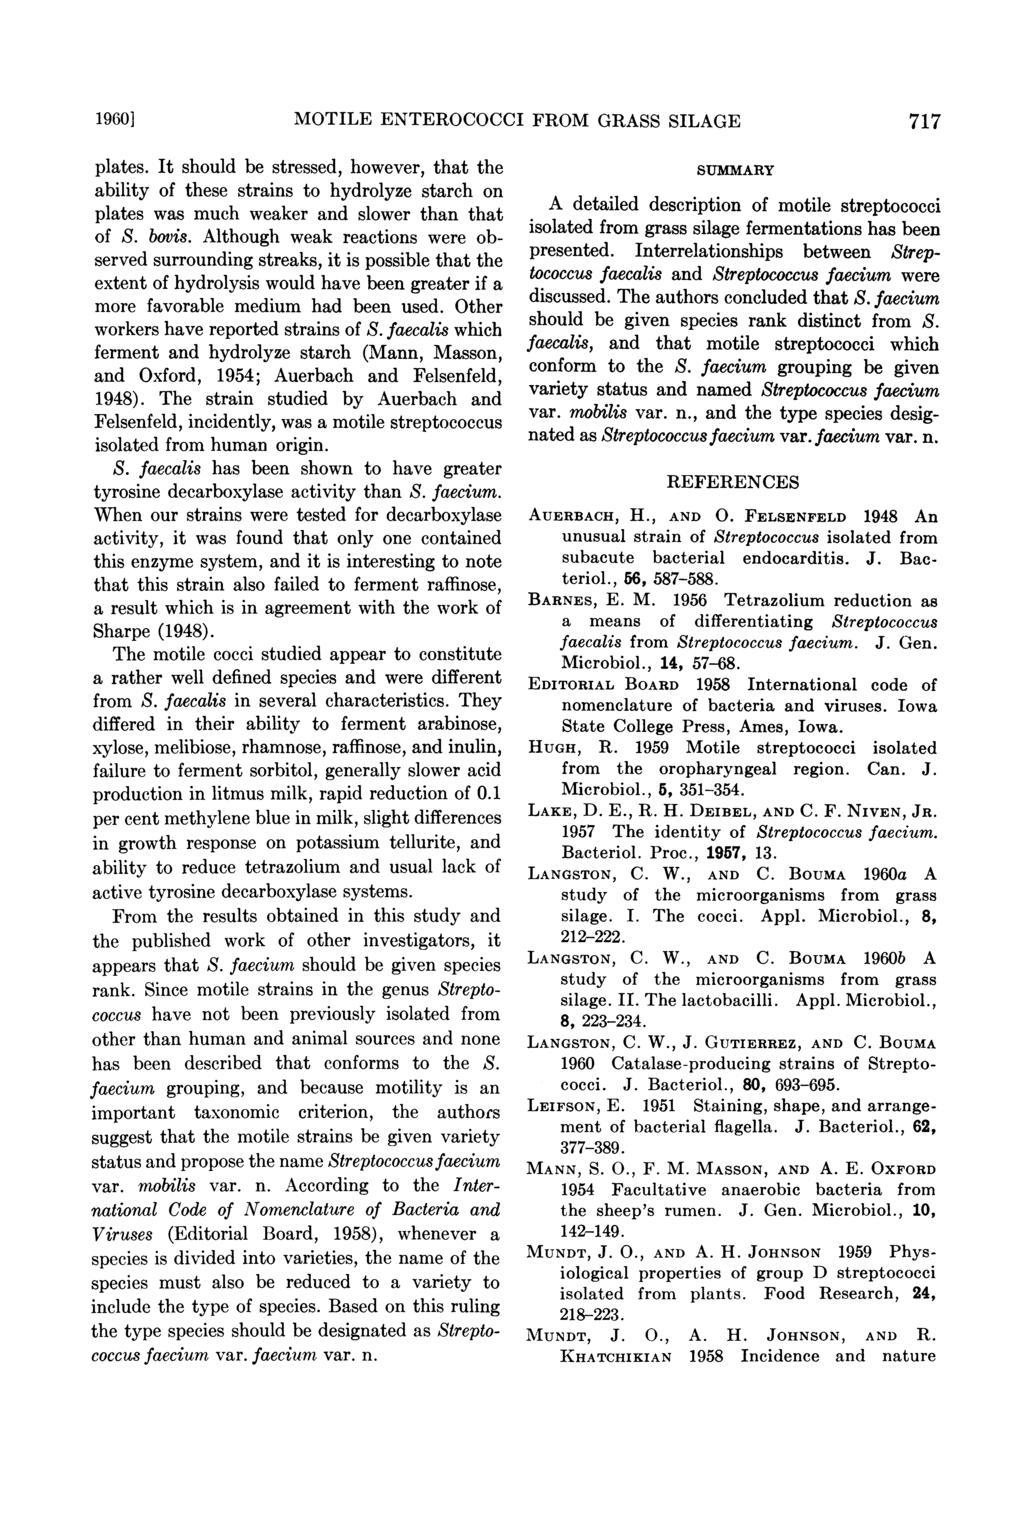 1960] MOTILE ENTEROCOCCI FROM GRASS SILAGE 717 plates. It should be stressed, however, that the ability of these strains to hydrolyze starch on plates was much weaker and slower than that of S. bovis.